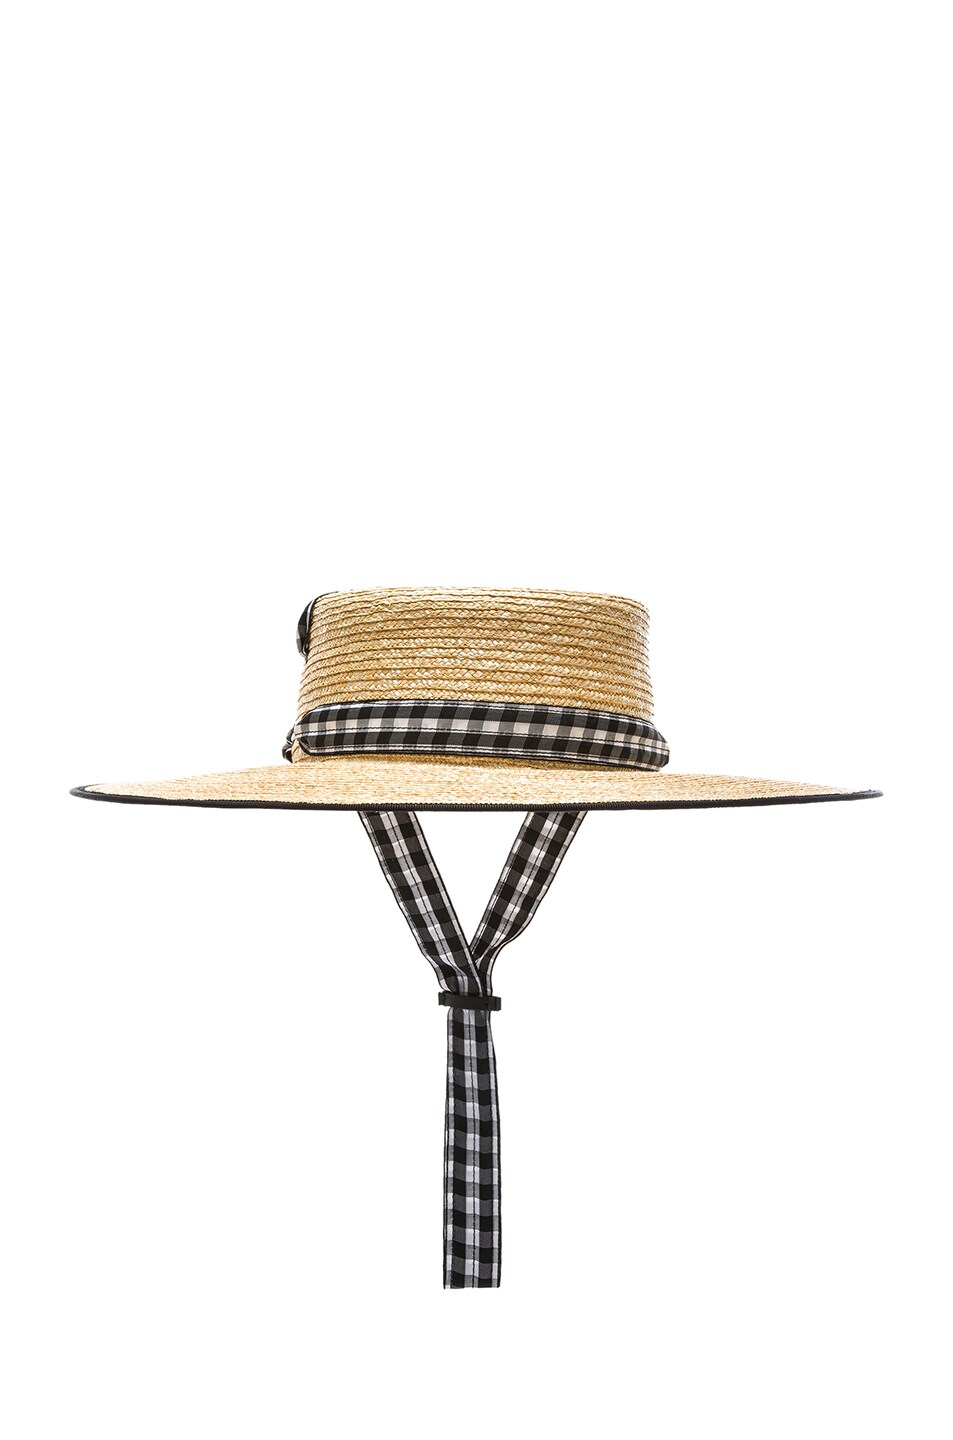 Image 1 of Lola Hats for FWRD Zorro Hat in Black & White Gingham